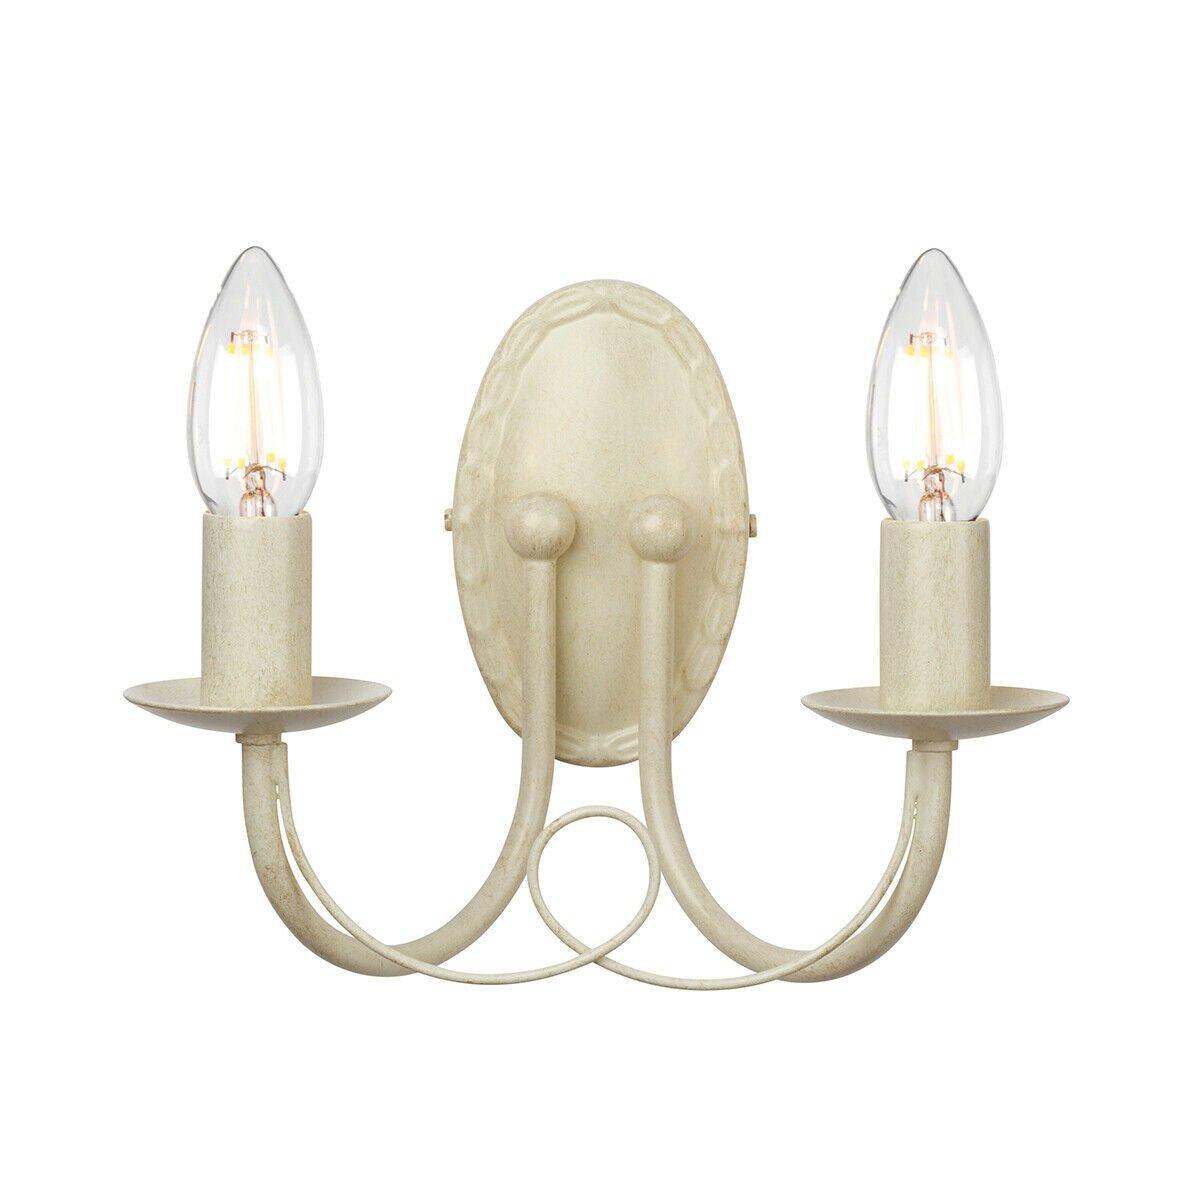 Twin Wall Light Sconce Looped Metal Drapes Double Ivory Gold LED E14 60W Bulb